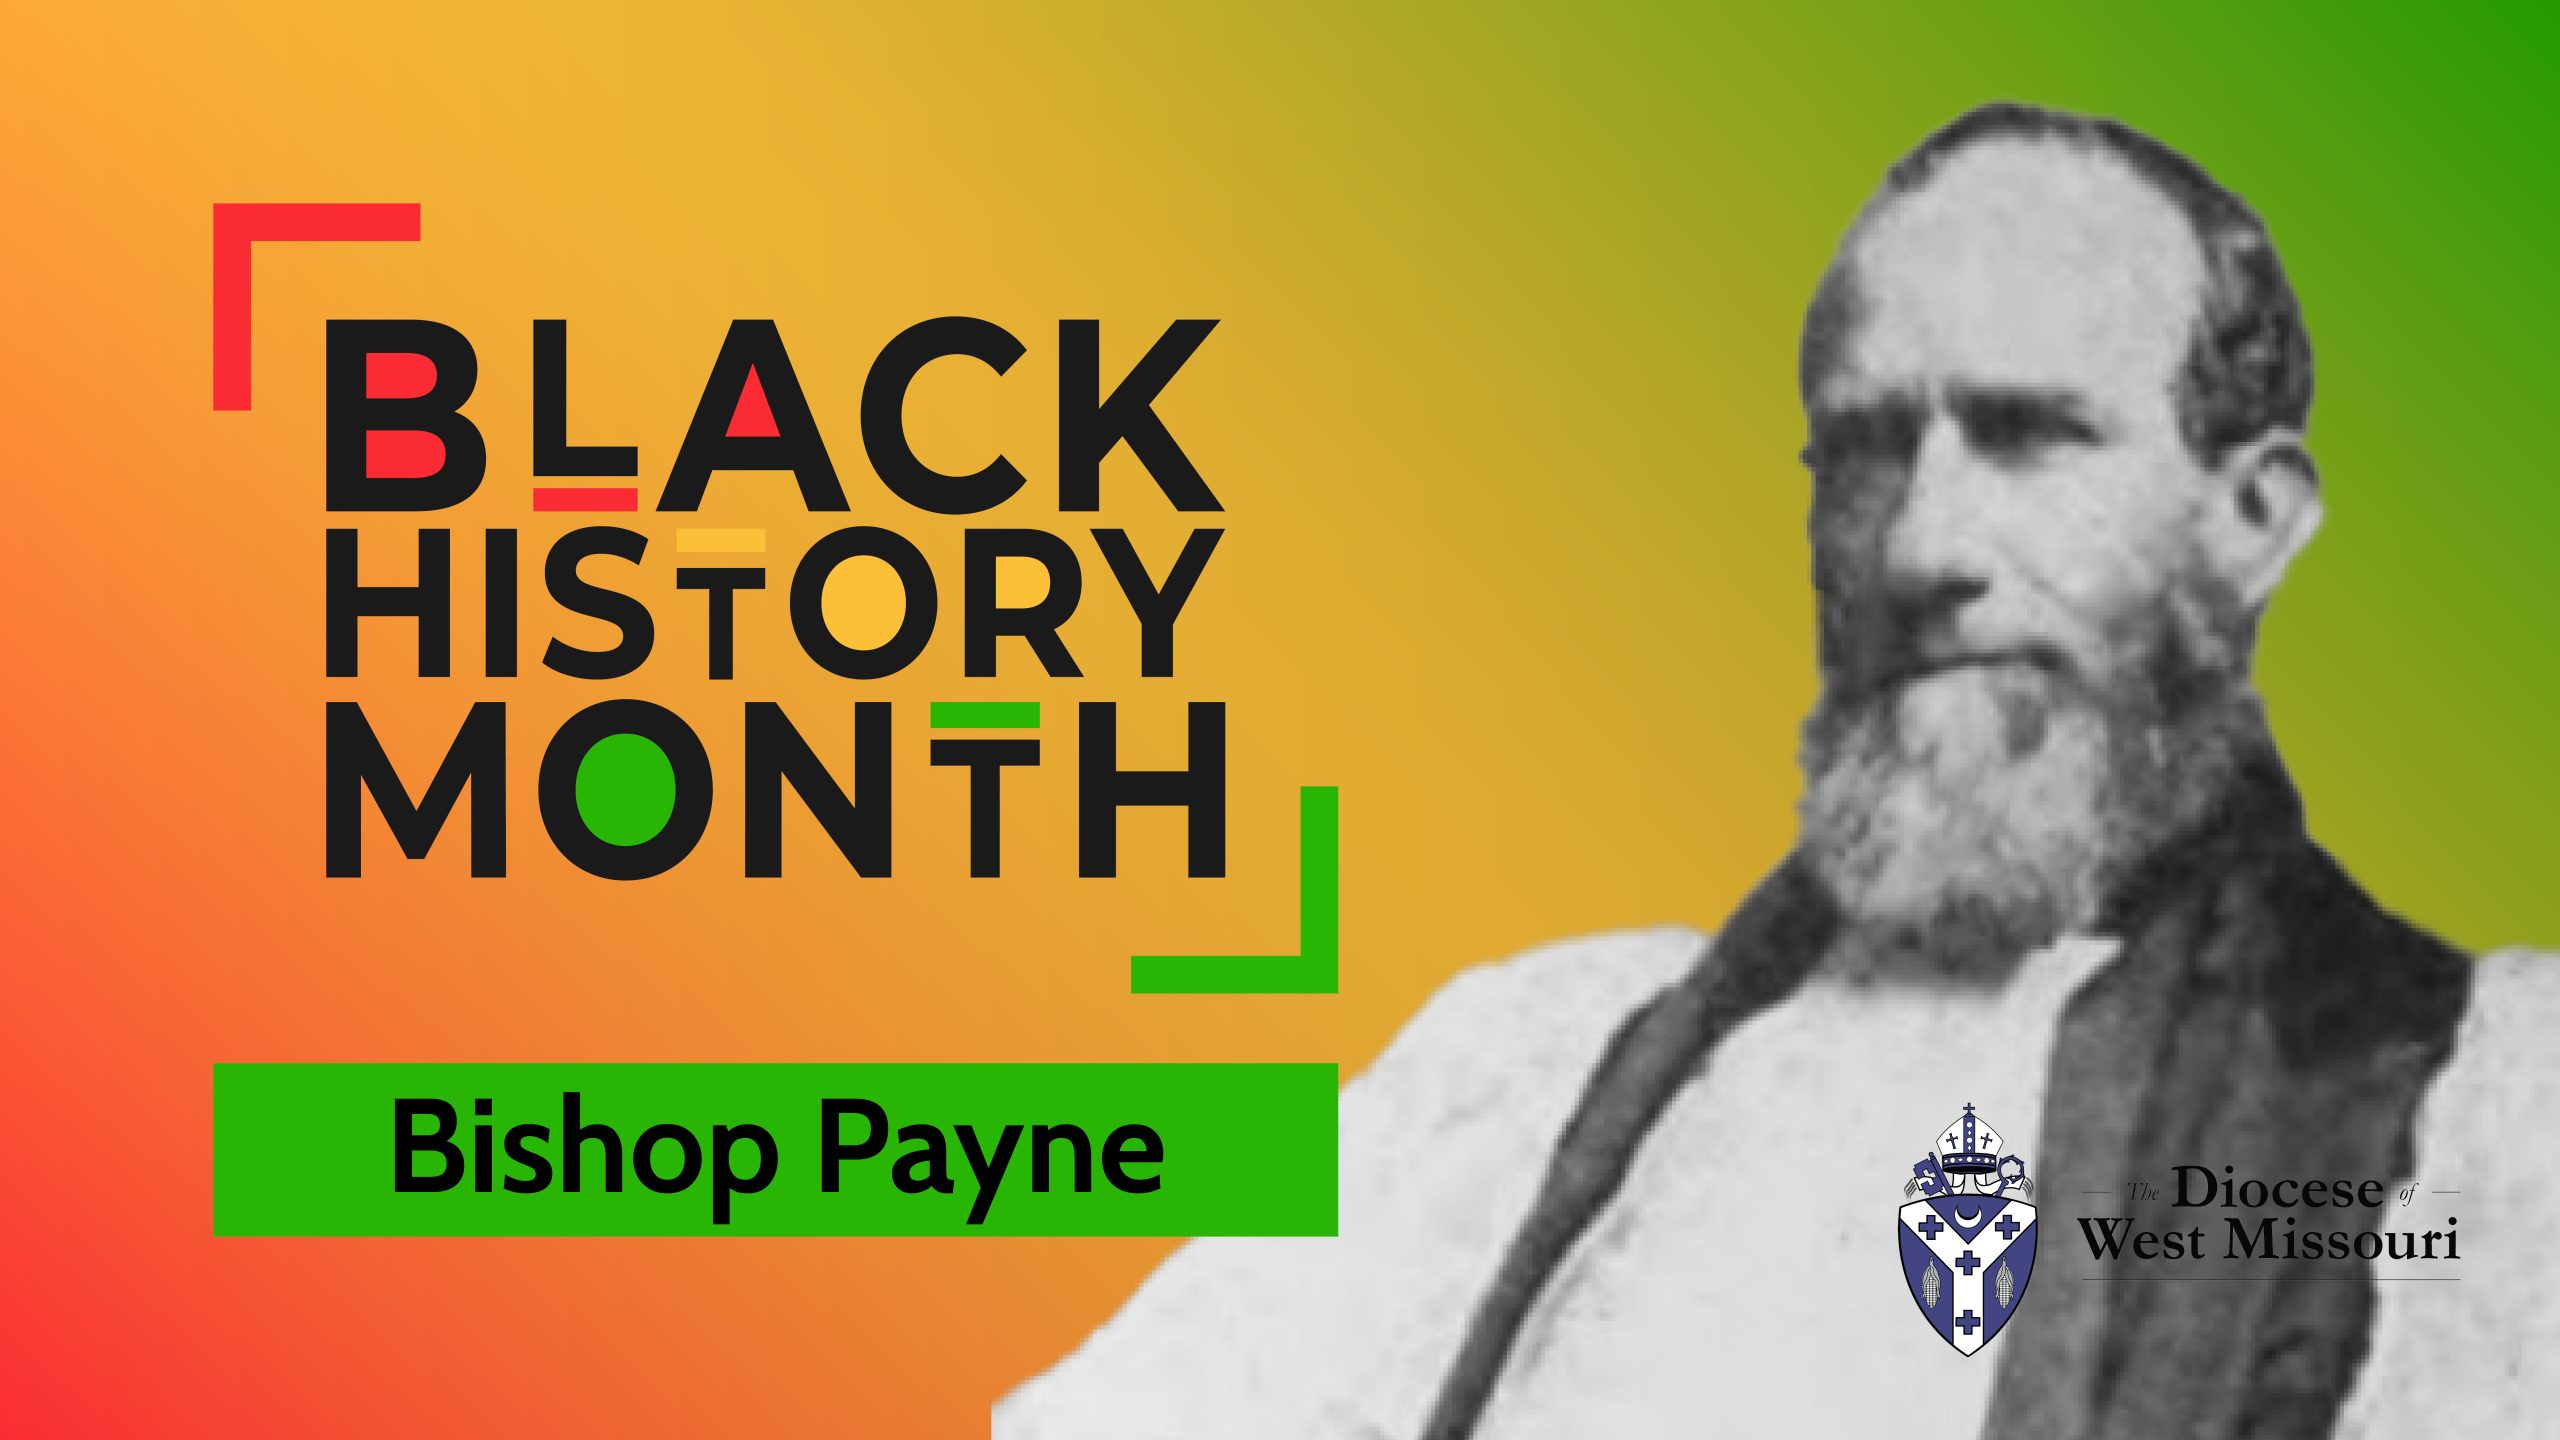 Black History Month: The Life of Bishop Payne